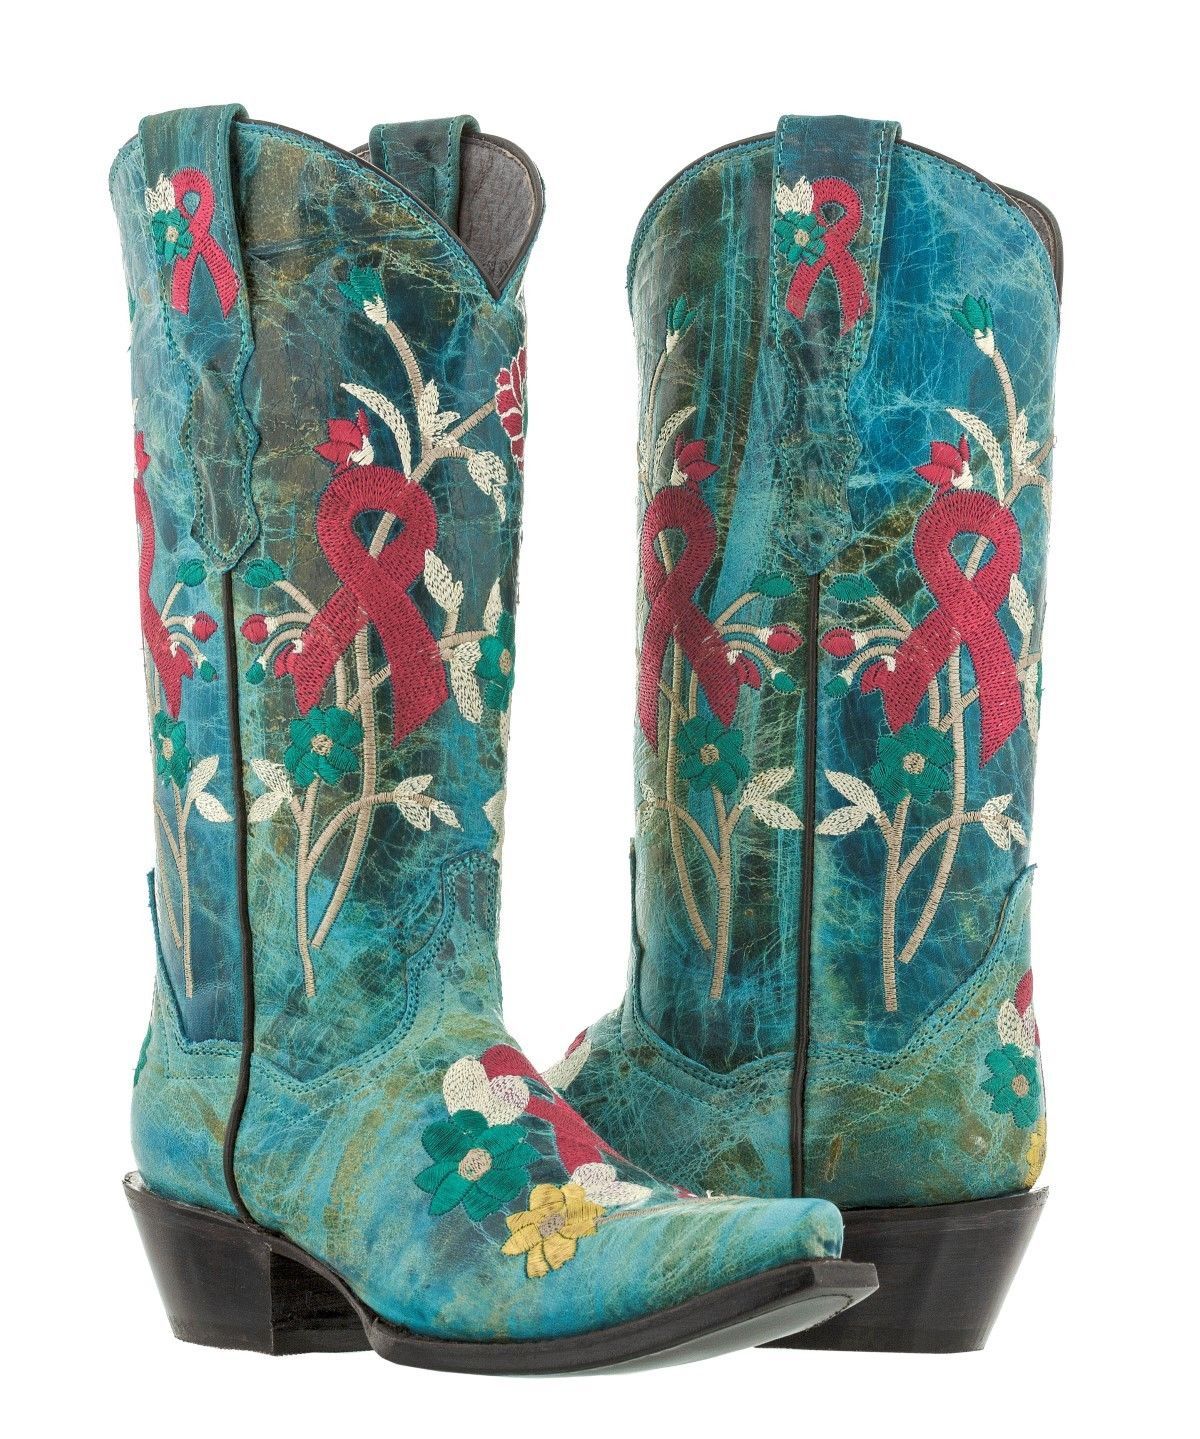 Primary image for Womens Turquoise Breast Cancer Awareness Ribbon Embroidered Cowgirl Boots Snip